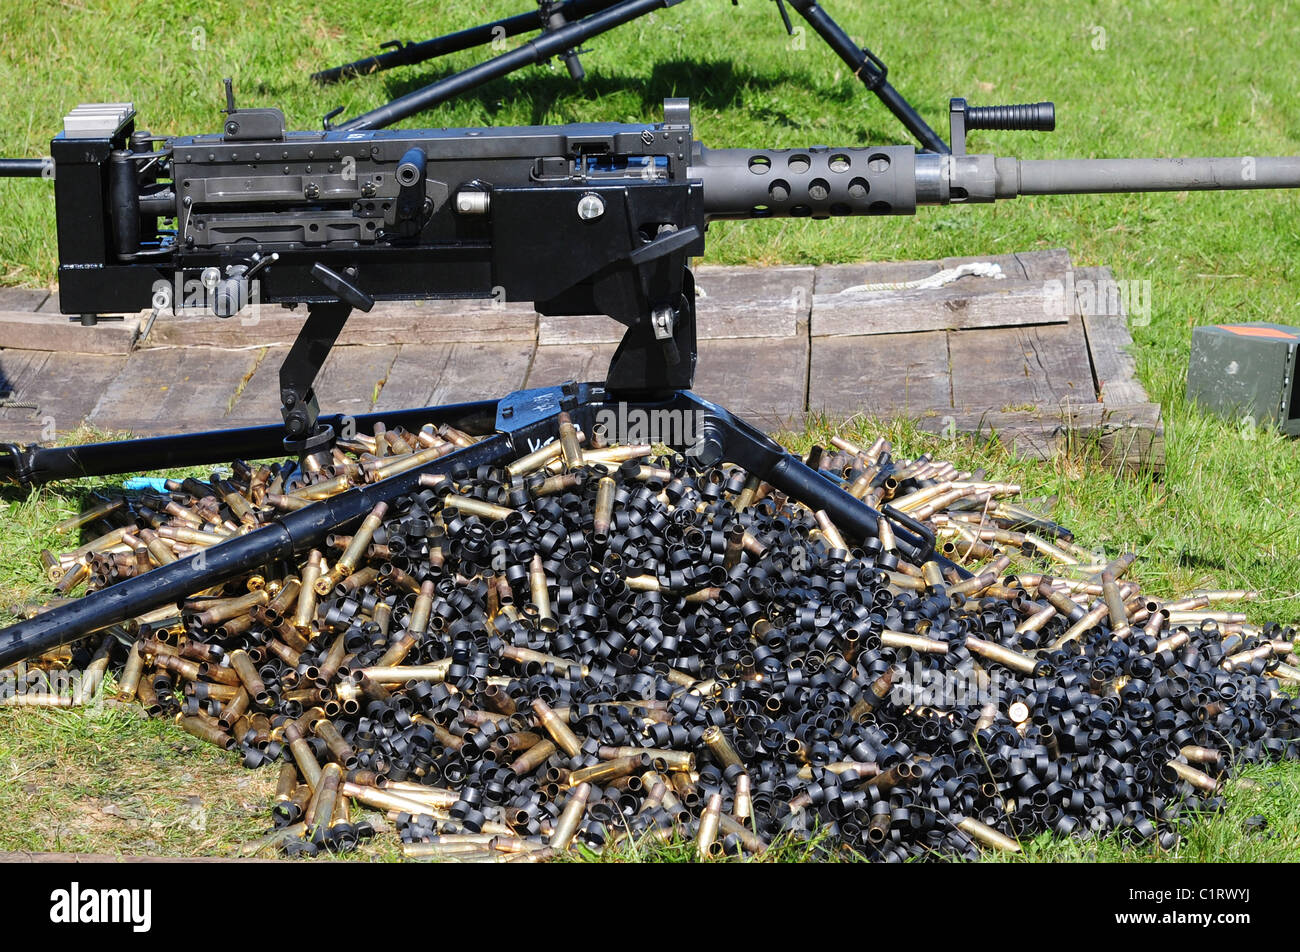 A .50 Caliber Browning Machine Gun with a pile of spent cases and links. Stock Photo